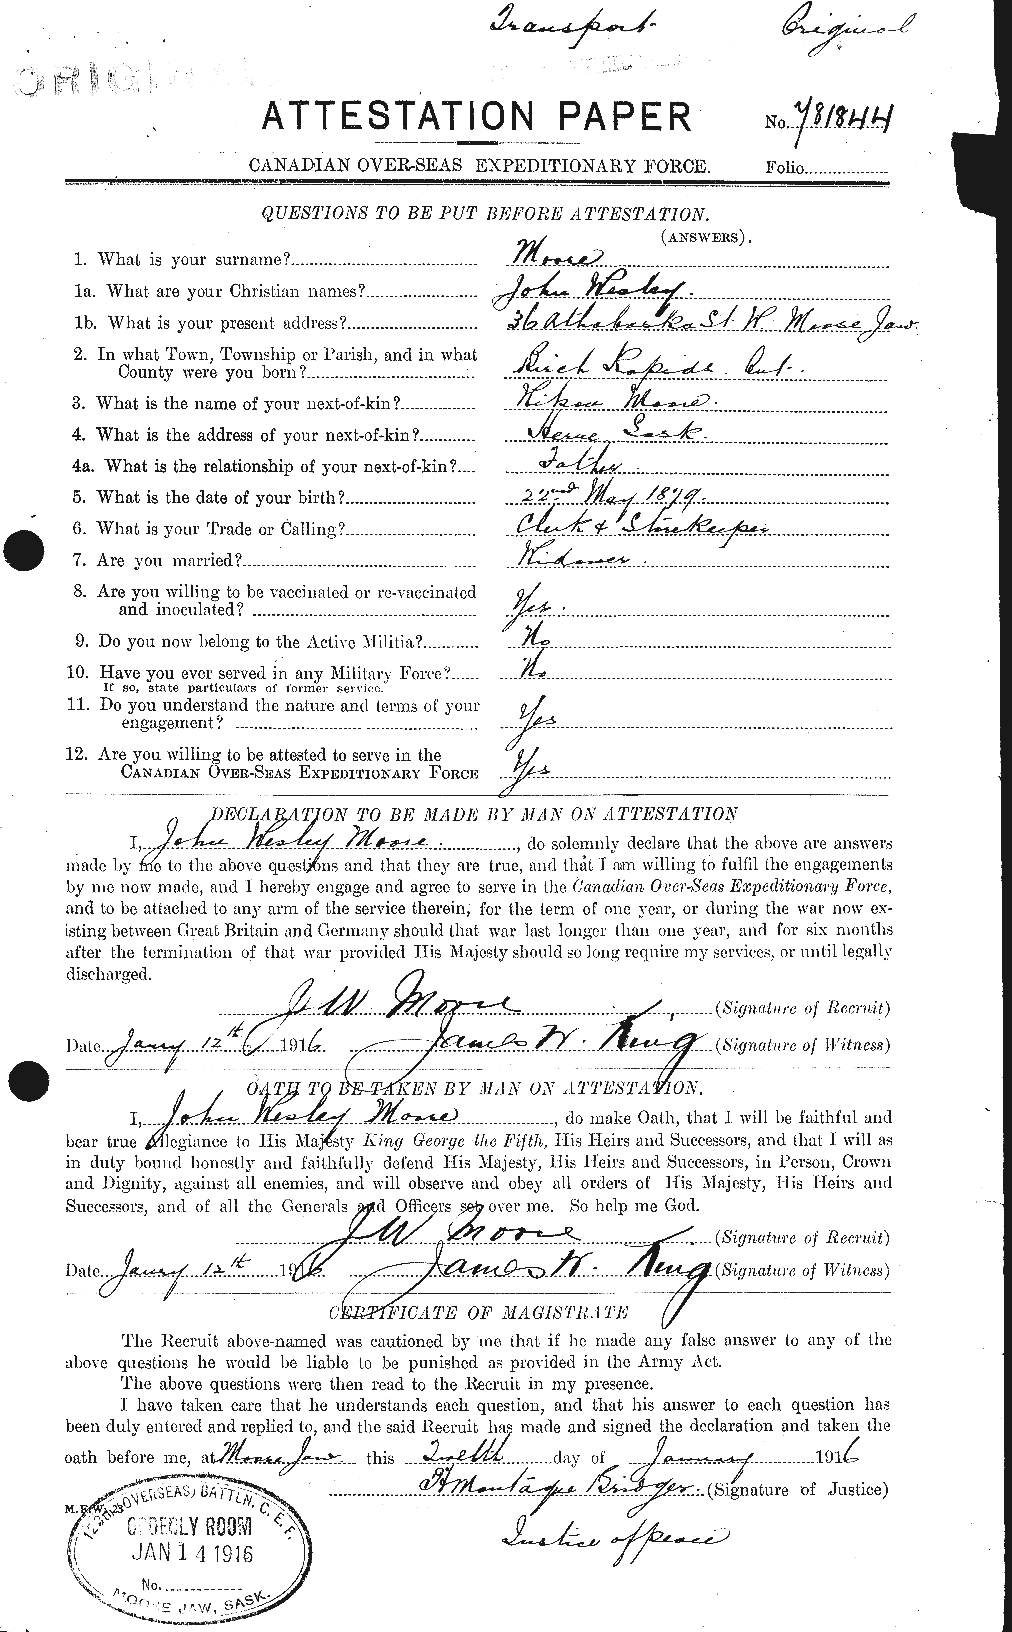 Personnel Records of the First World War - CEF 503346a